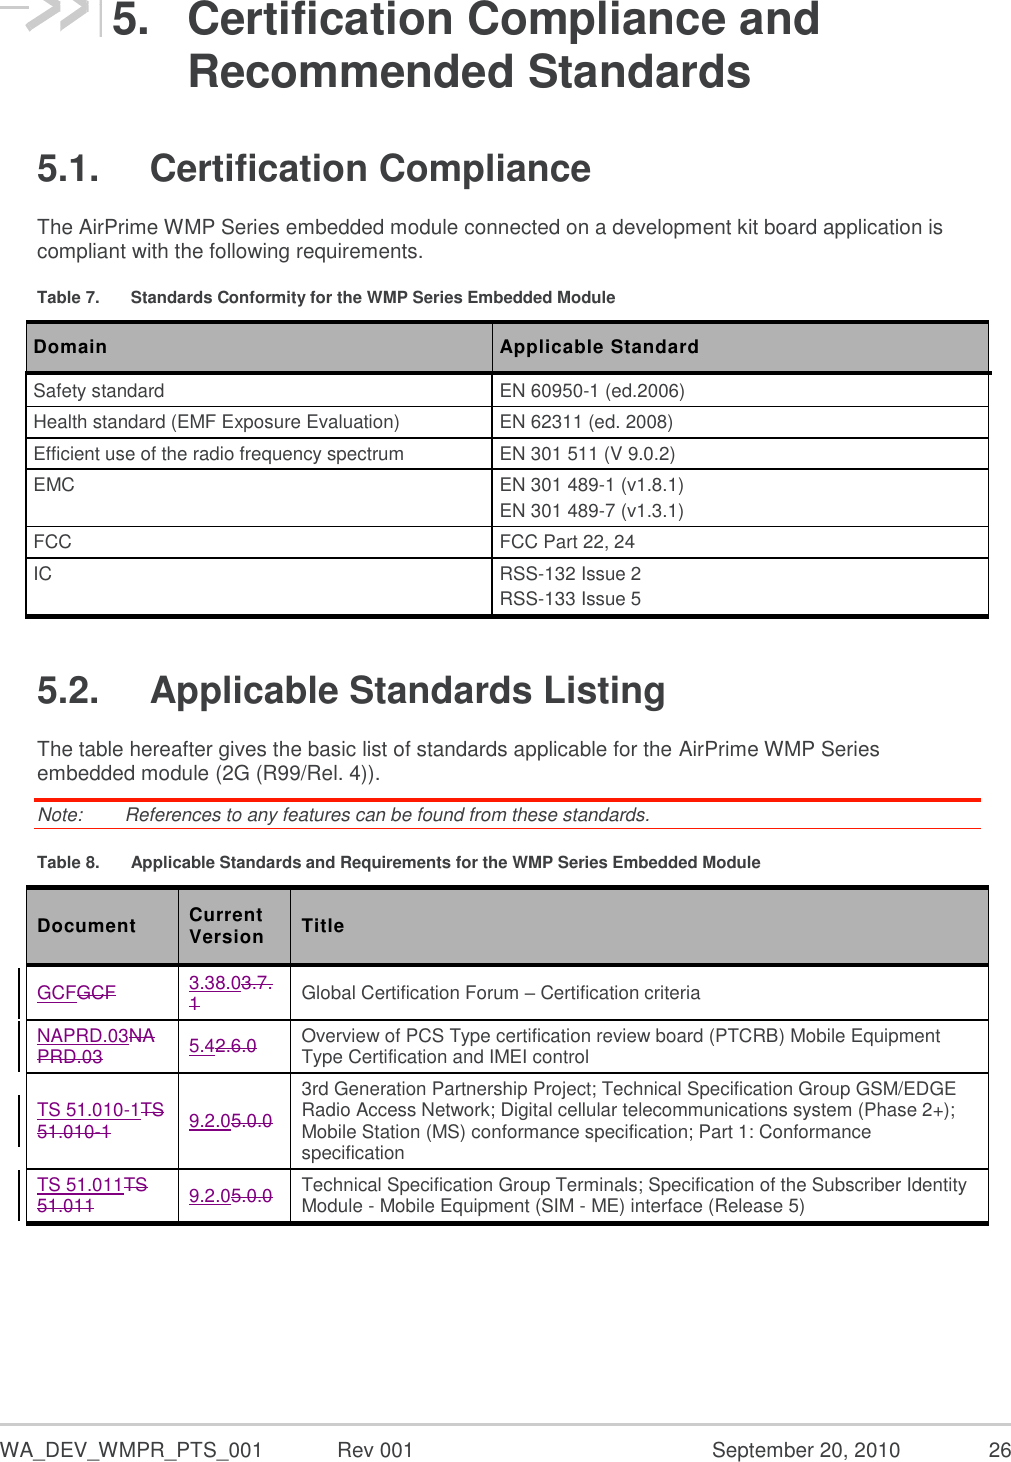  WA_DEV_WMPR_PTS_001  Rev 001  September 20, 2010  26 5.  Certification Compliance and Recommended Standards 5.1.  Certification Compliance The AirPrime WMP Series embedded module connected on a development kit board application is compliant with the following requirements. Table 7.  Standards Conformity for the WMP Series Embedded Module Domain Applicable Standard Safety standard EN 60950-1 (ed.2006) Health standard (EMF Exposure Evaluation) EN 62311 (ed. 2008) Efficient use of the radio frequency spectrum EN 301 511 (V 9.0.2) EMC EN 301 489-1 (v1.8.1) EN 301 489-7 (v1.3.1) FCC FCC Part 22, 24  IC RSS-132 Issue 2 RSS-133 Issue 5 5.2.  Applicable Standards Listing The table hereafter gives the basic list of standards applicable for the AirPrime WMP Series embedded module (2G (R99/Rel. 4)).  Note:   References to any features can be found from these standards. Table 8.  Applicable Standards and Requirements for the WMP Series Embedded Module Document Current Version Title GCFGCF 3.38.03.7.1 Global Certification Forum – Certification criteria NAPRD.03NAPRD.03 5.42.6.0 Overview of PCS Type certification review board (PTCRB) Mobile Equipment Type Certification and IMEI control  TS 51.010-1TS 51.010-1 9.2.05.0.0 3rd Generation Partnership Project; Technical Specification Group GSM/EDGE Radio Access Network; Digital cellular telecommunications system (Phase 2+); Mobile Station (MS) conformance specification; Part 1: Conformance specification  TS 51.011TS 51.011 9.2.05.0.0 Technical Specification Group Terminals; Specification of the Subscriber Identity Module - Mobile Equipment (SIM - ME) interface (Release 5)    